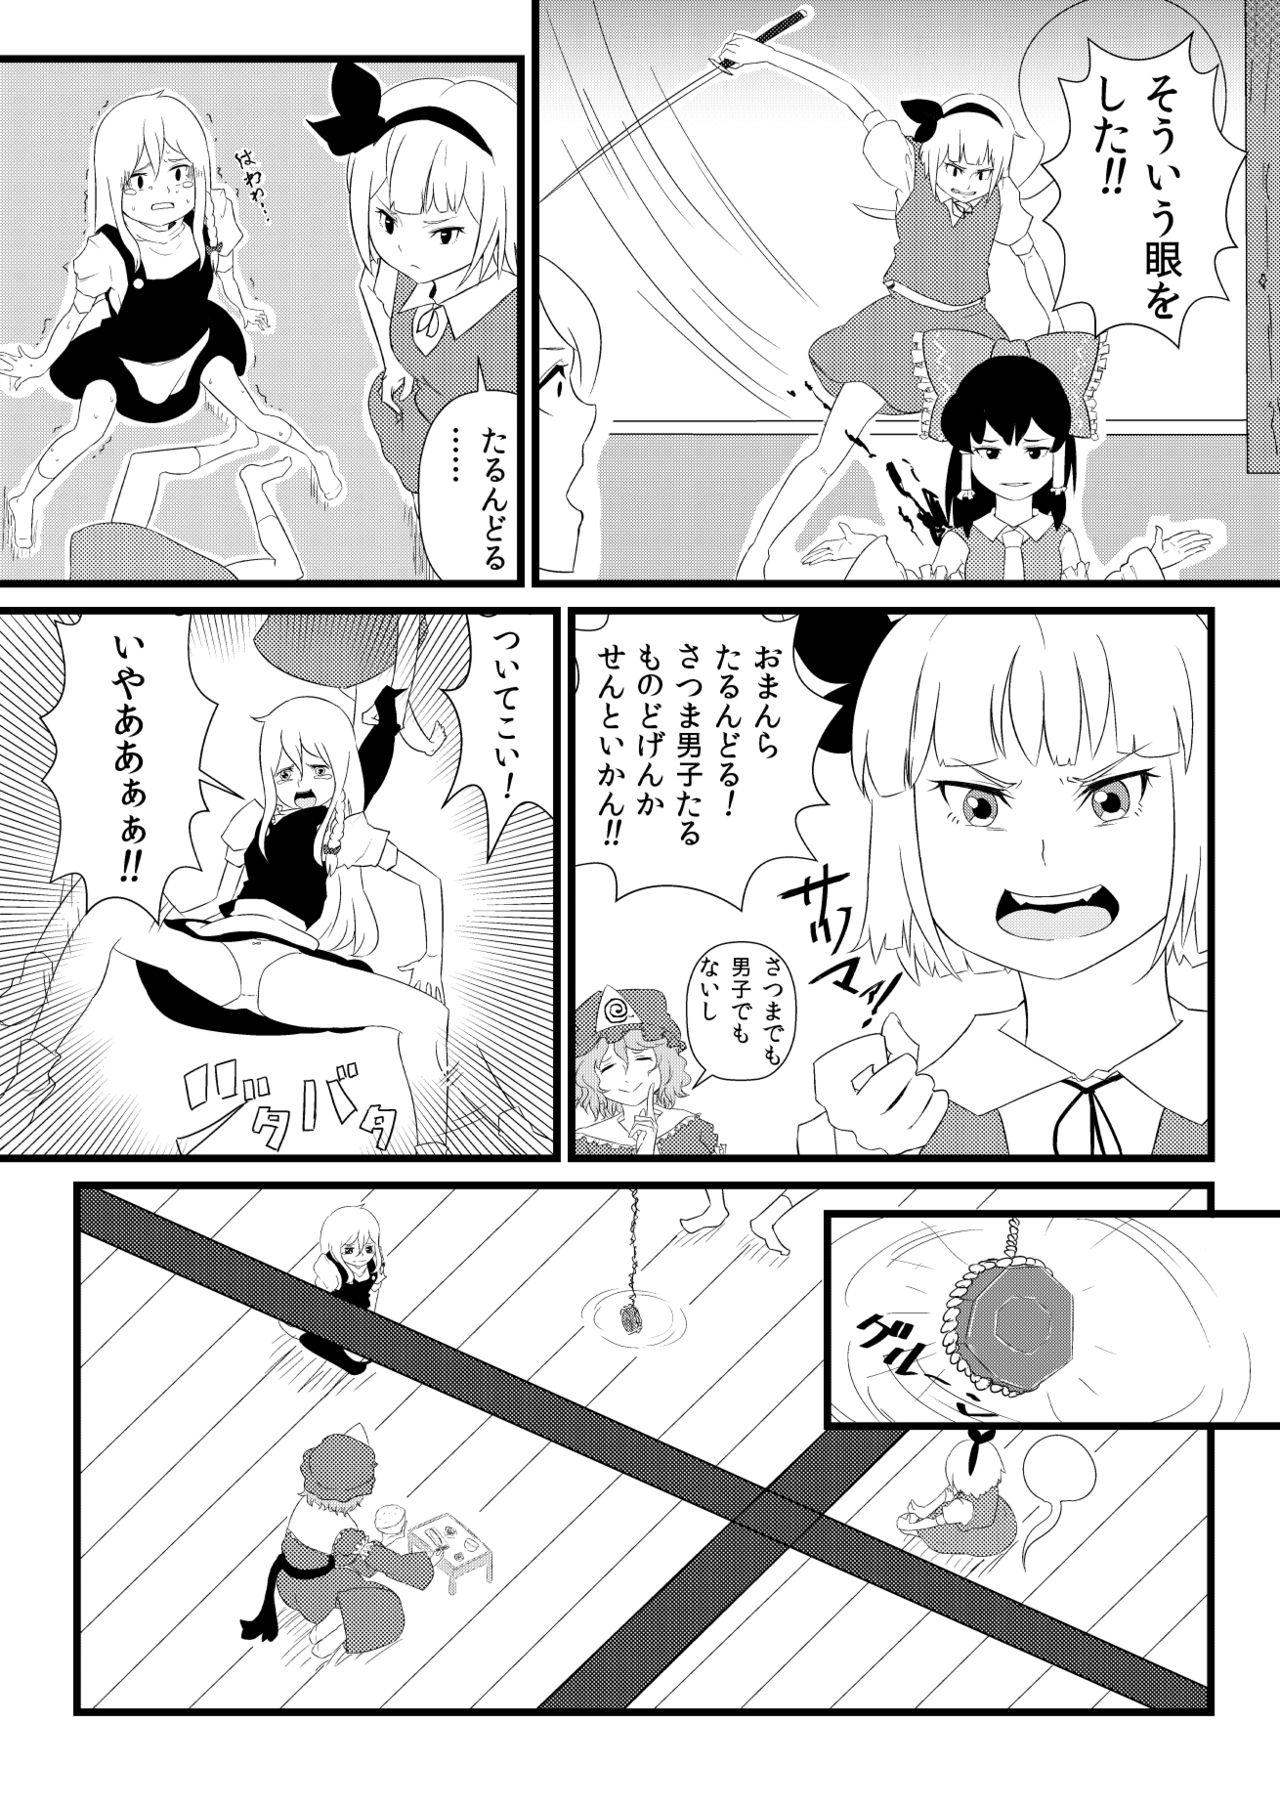 Cumload 東方板としあき合同誌5 - Touhou project Cunt - Page 3